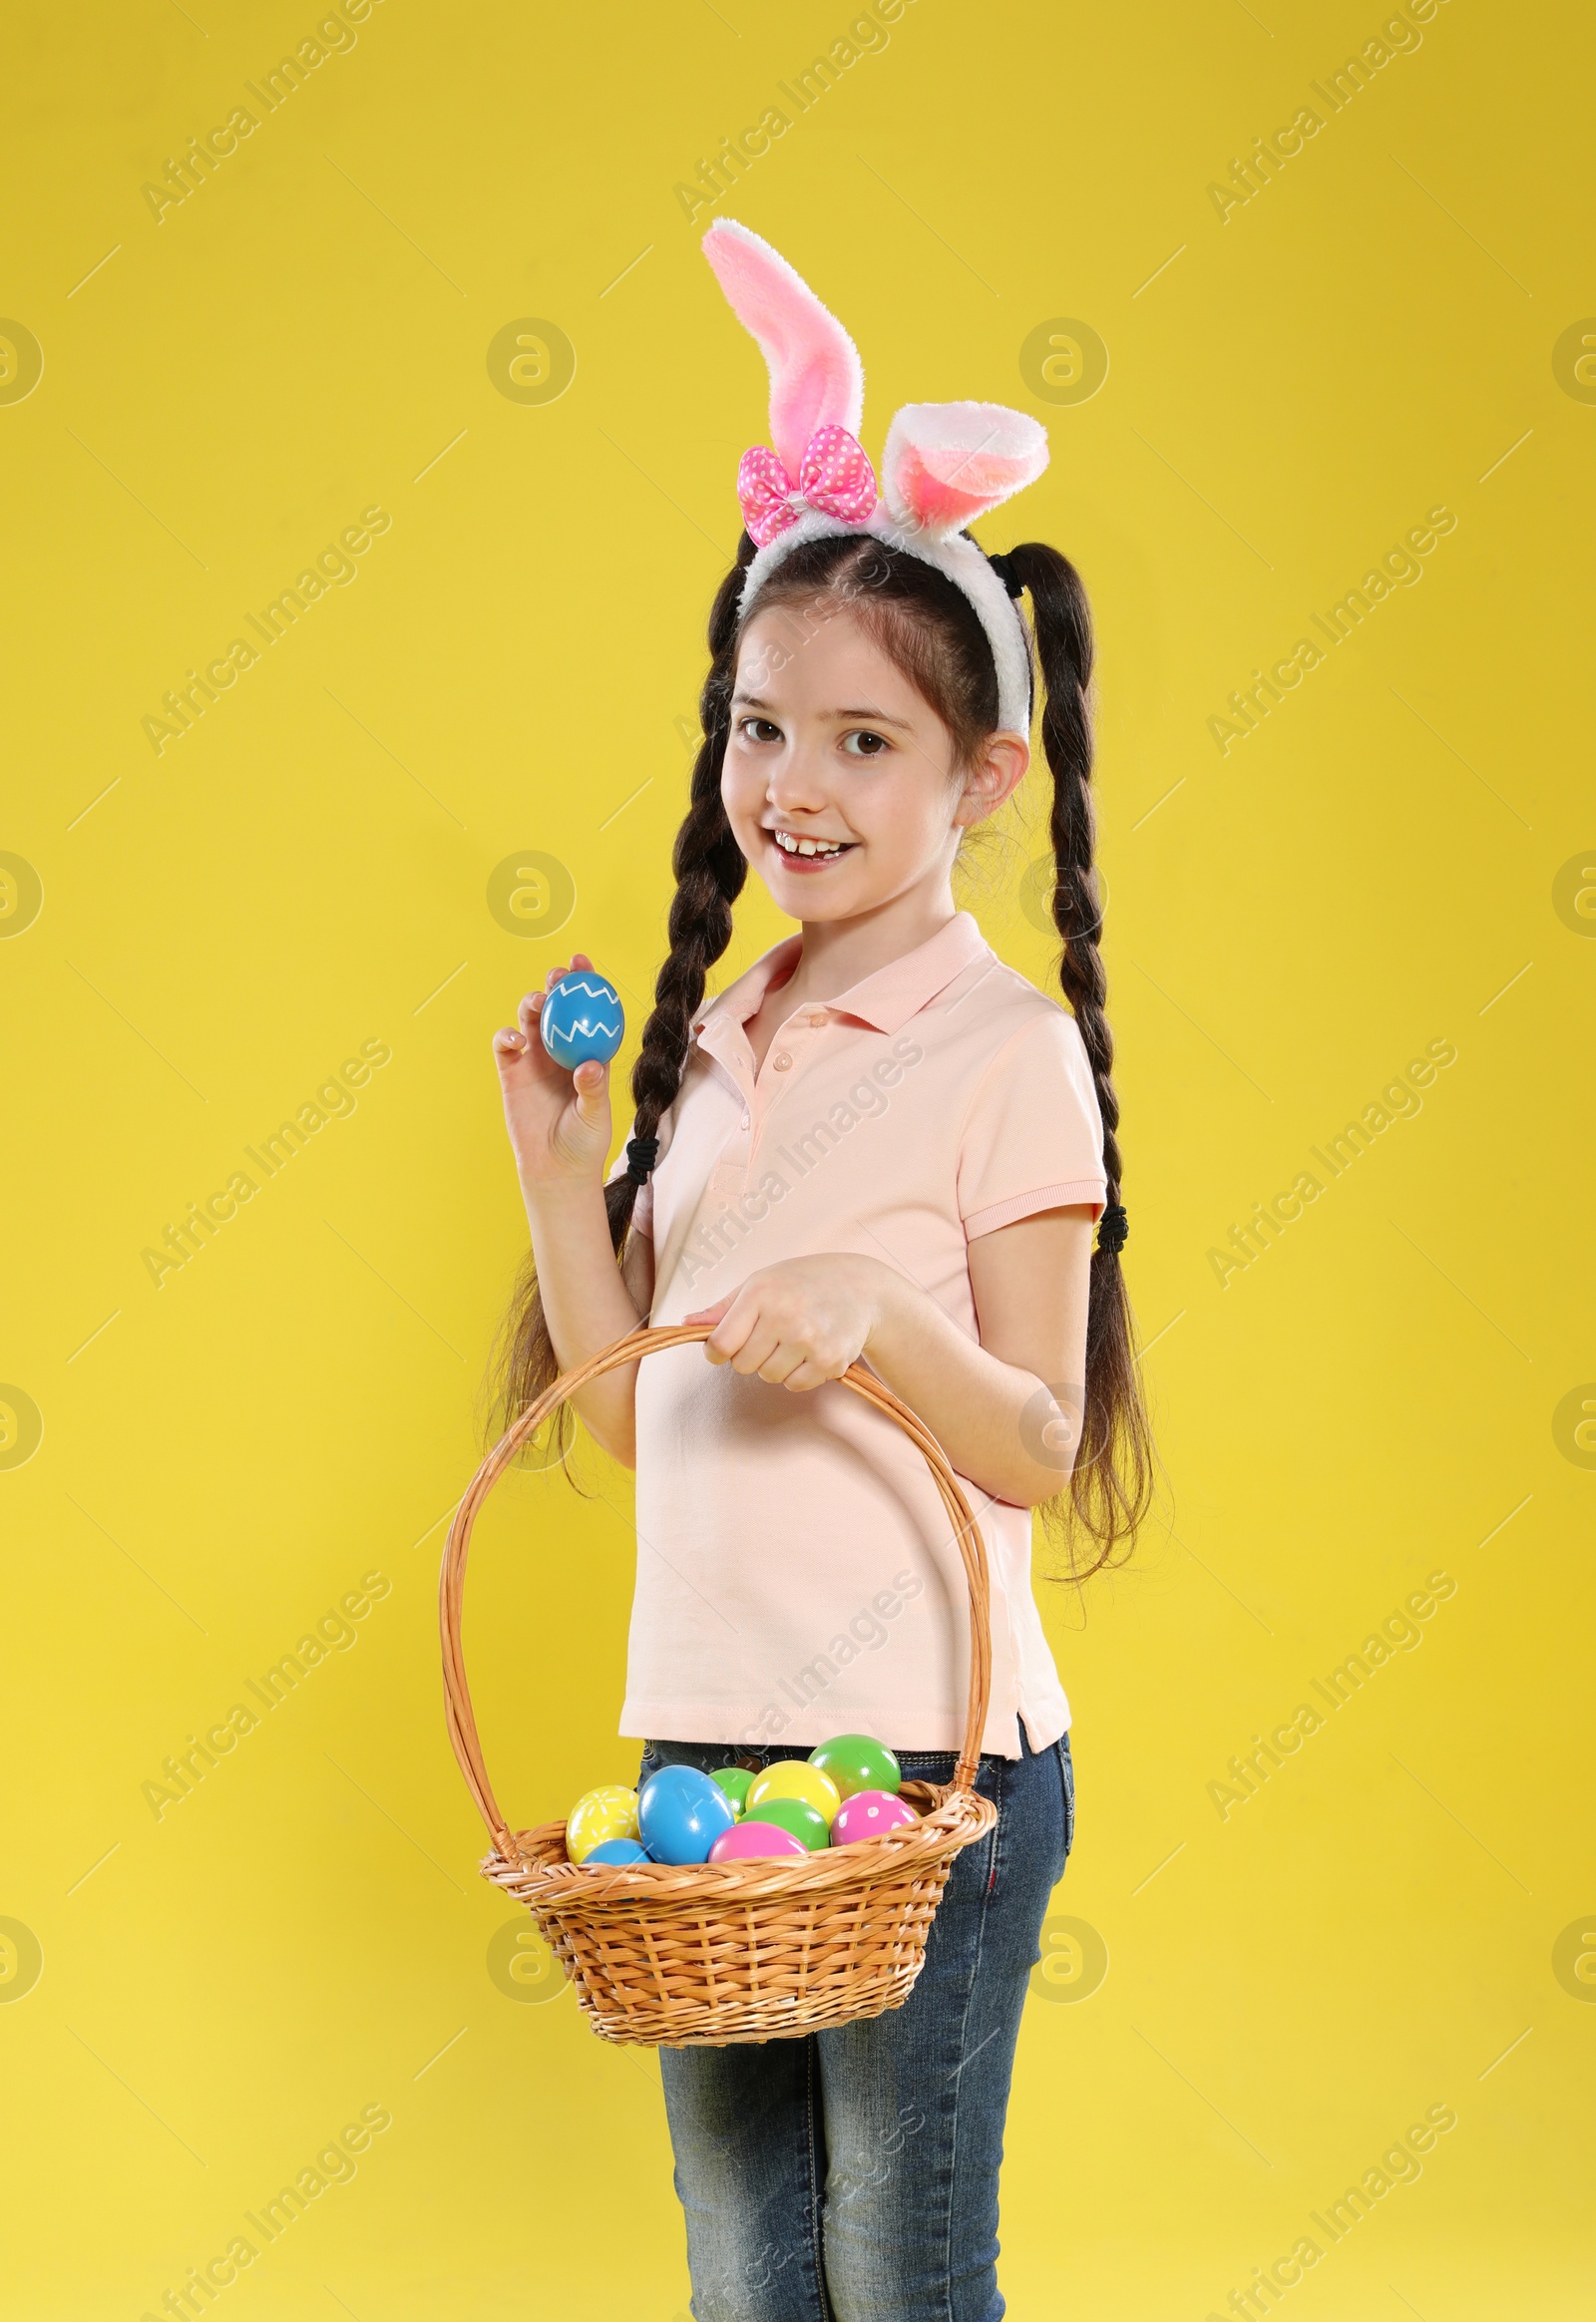 Photo of Little girl in bunny ears headband holding basket with Easter eggs on color background